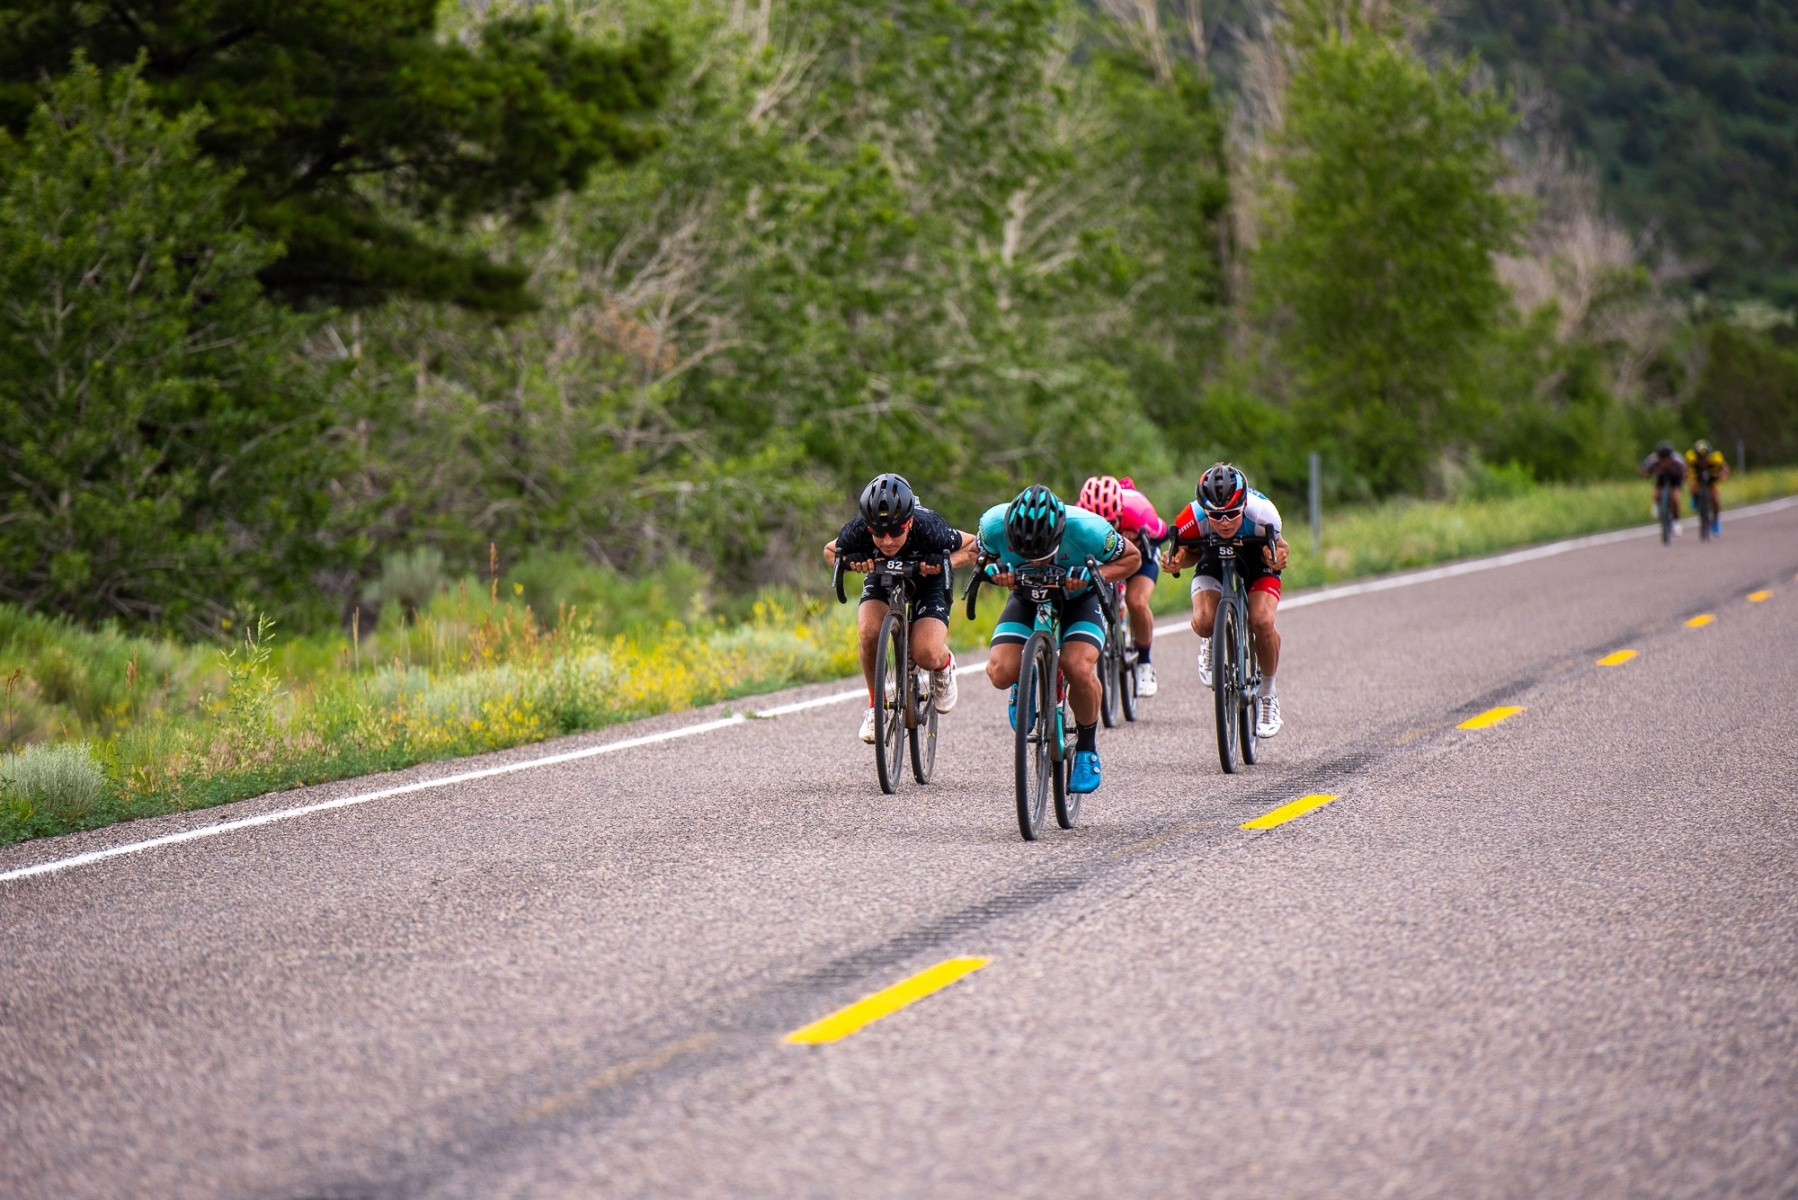 The Pro men's field split into several small groups on the Highway 153 descent into Junction. Photo: Steven L. Sheffield